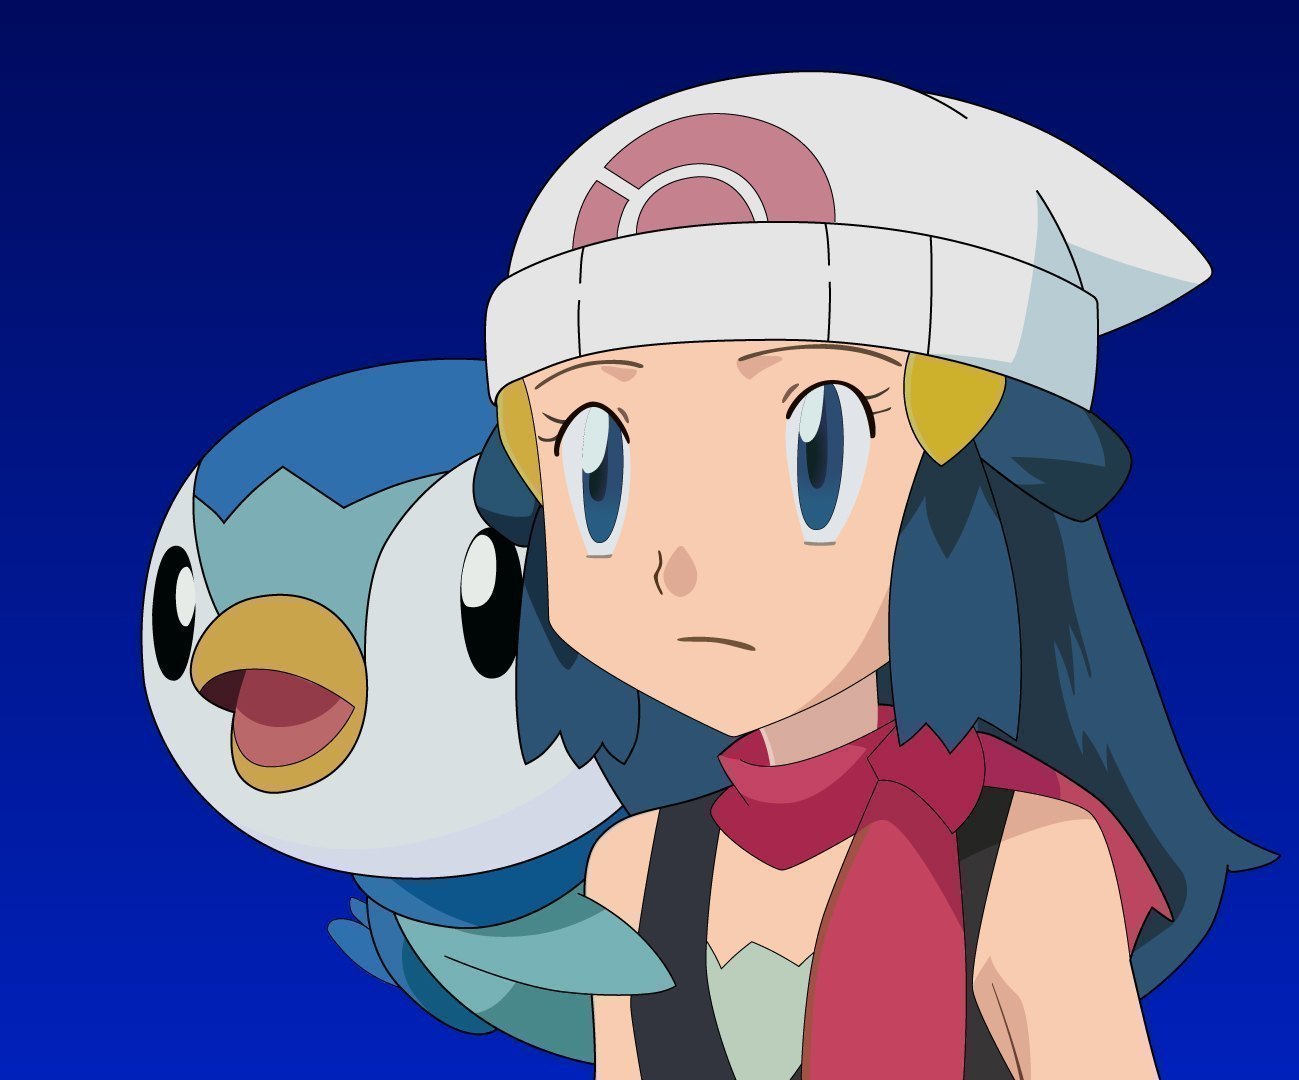 Pokemon Celebrates Dawn and Piplup With Special Music Video